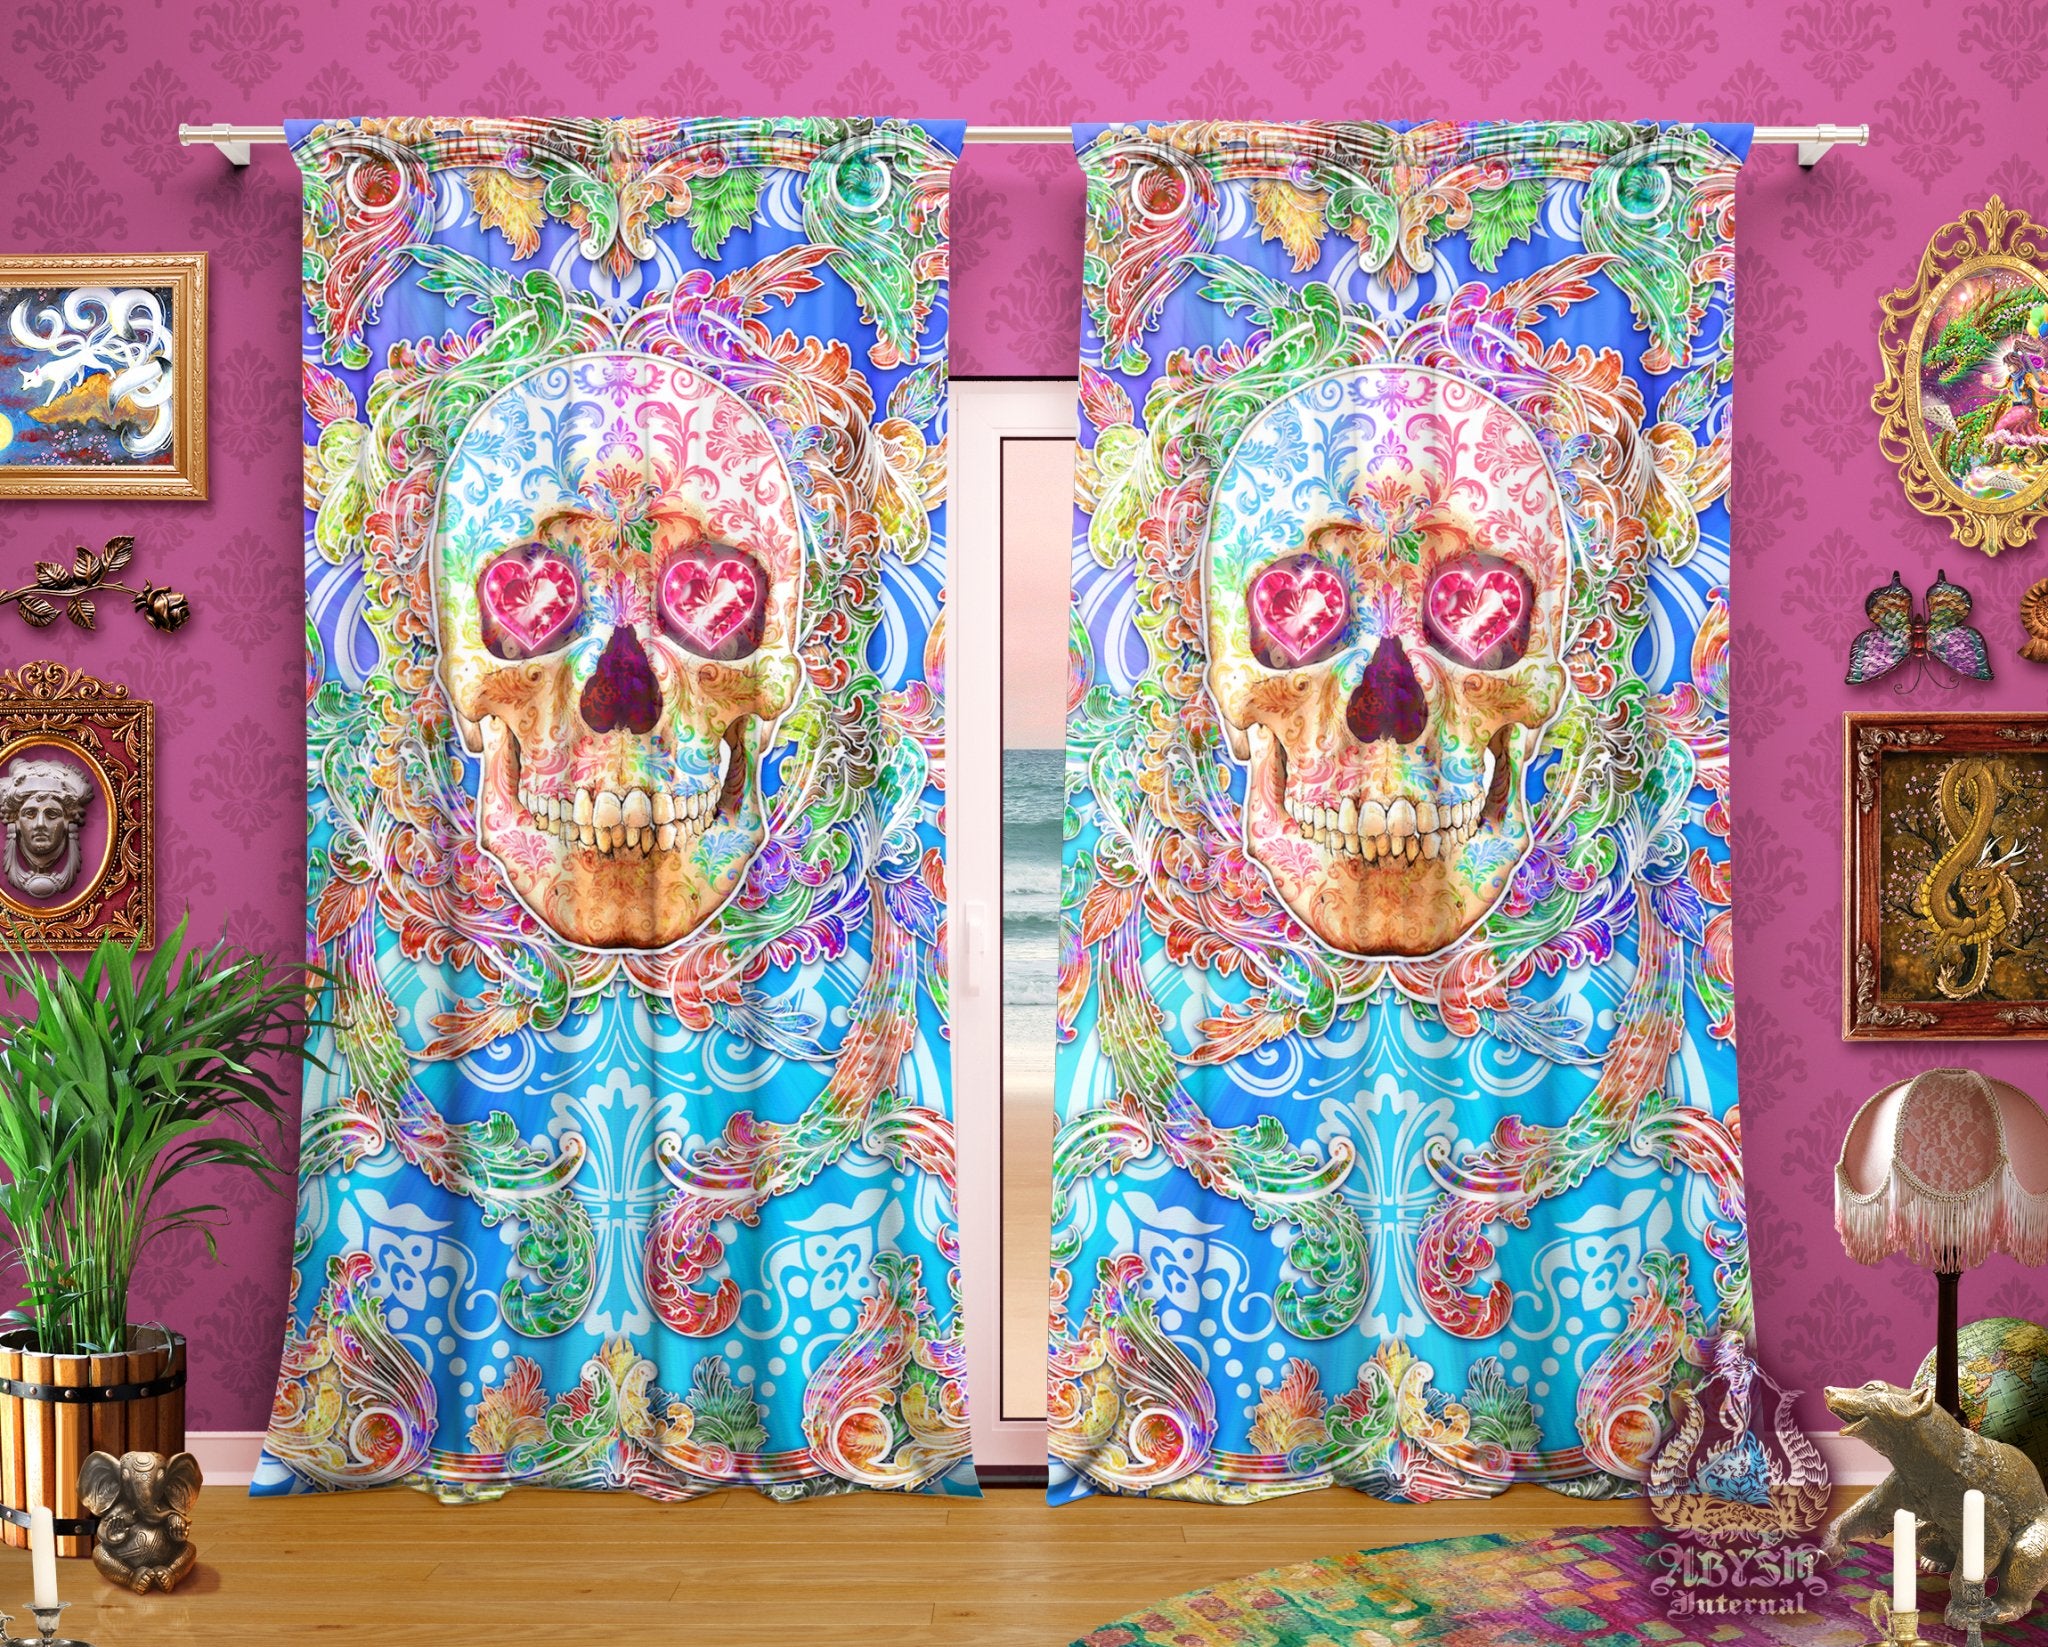 Boho Curtains, 50x84' Printed Window Panels, Sugar Skull Art Print, Festive Summer Decor - Psy Color with Flowers or Rubies, 2 versions - Abysm Internal